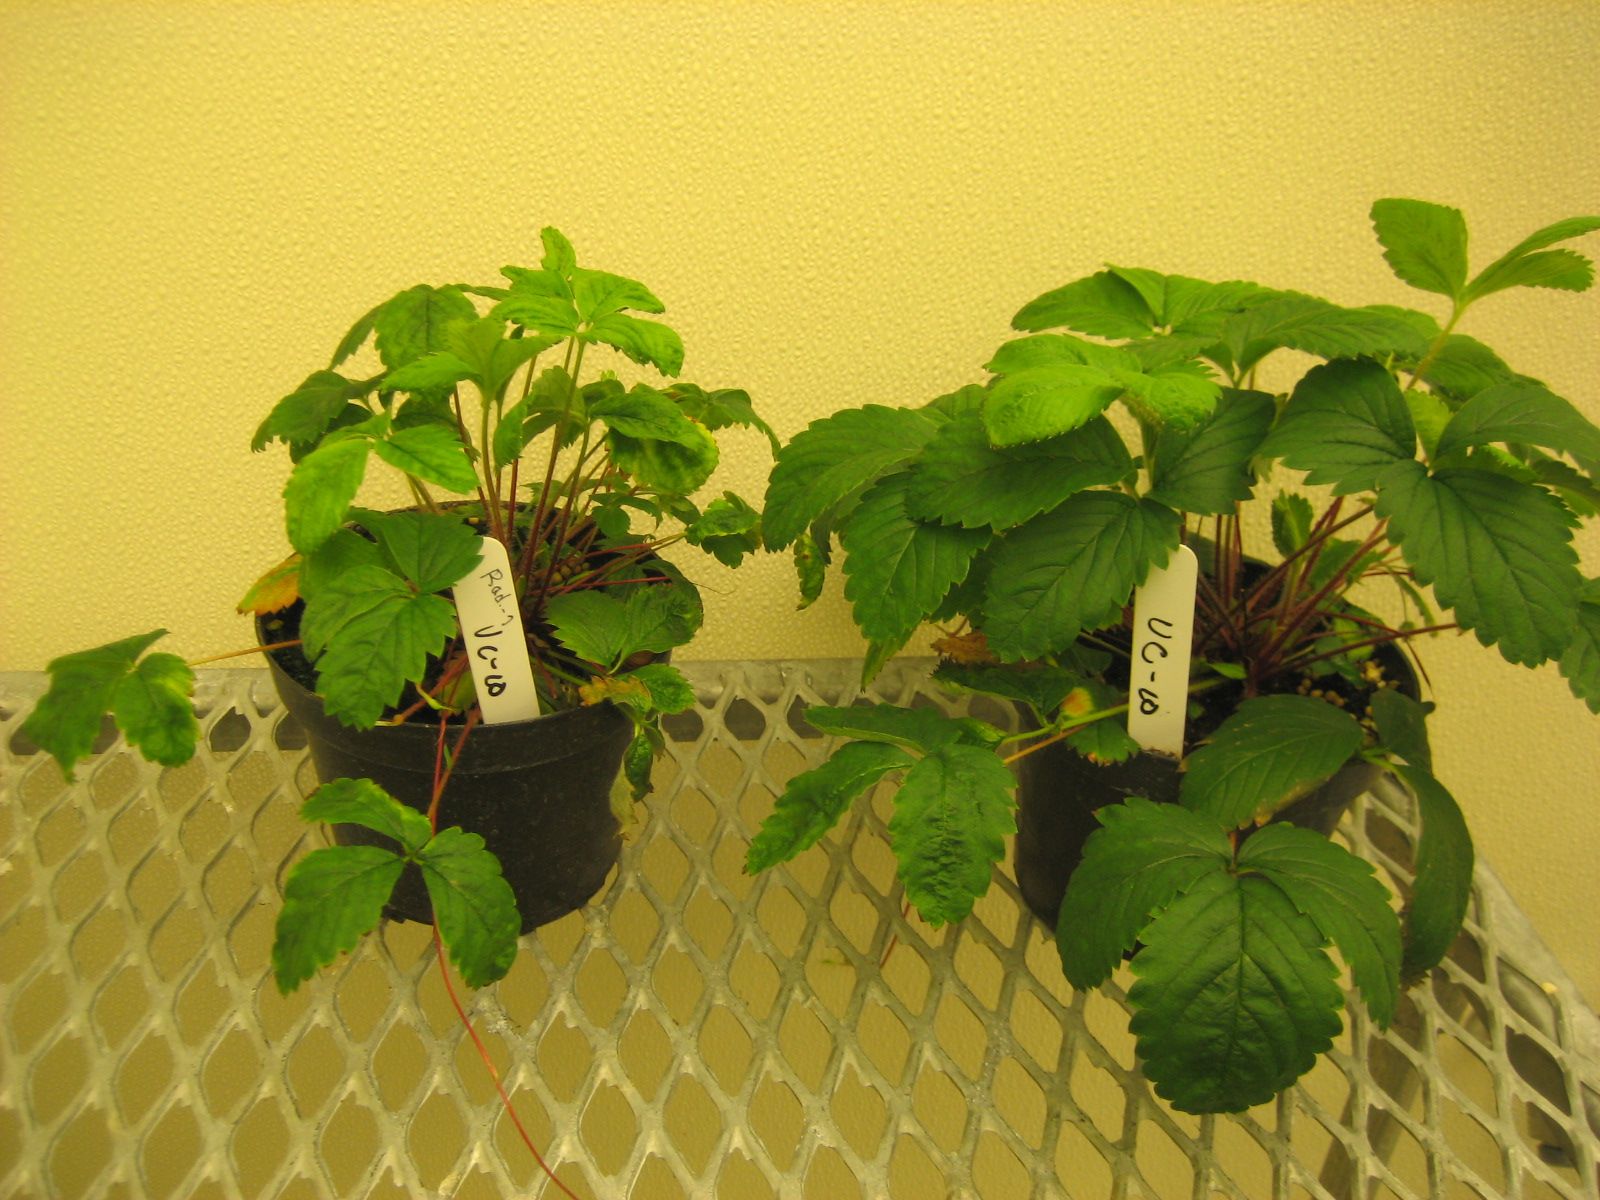 Fragaria virginiana indicator plants: right, healthy; left, leaf distortion and stunting symptoms after grafting with virus-infected tissue. 